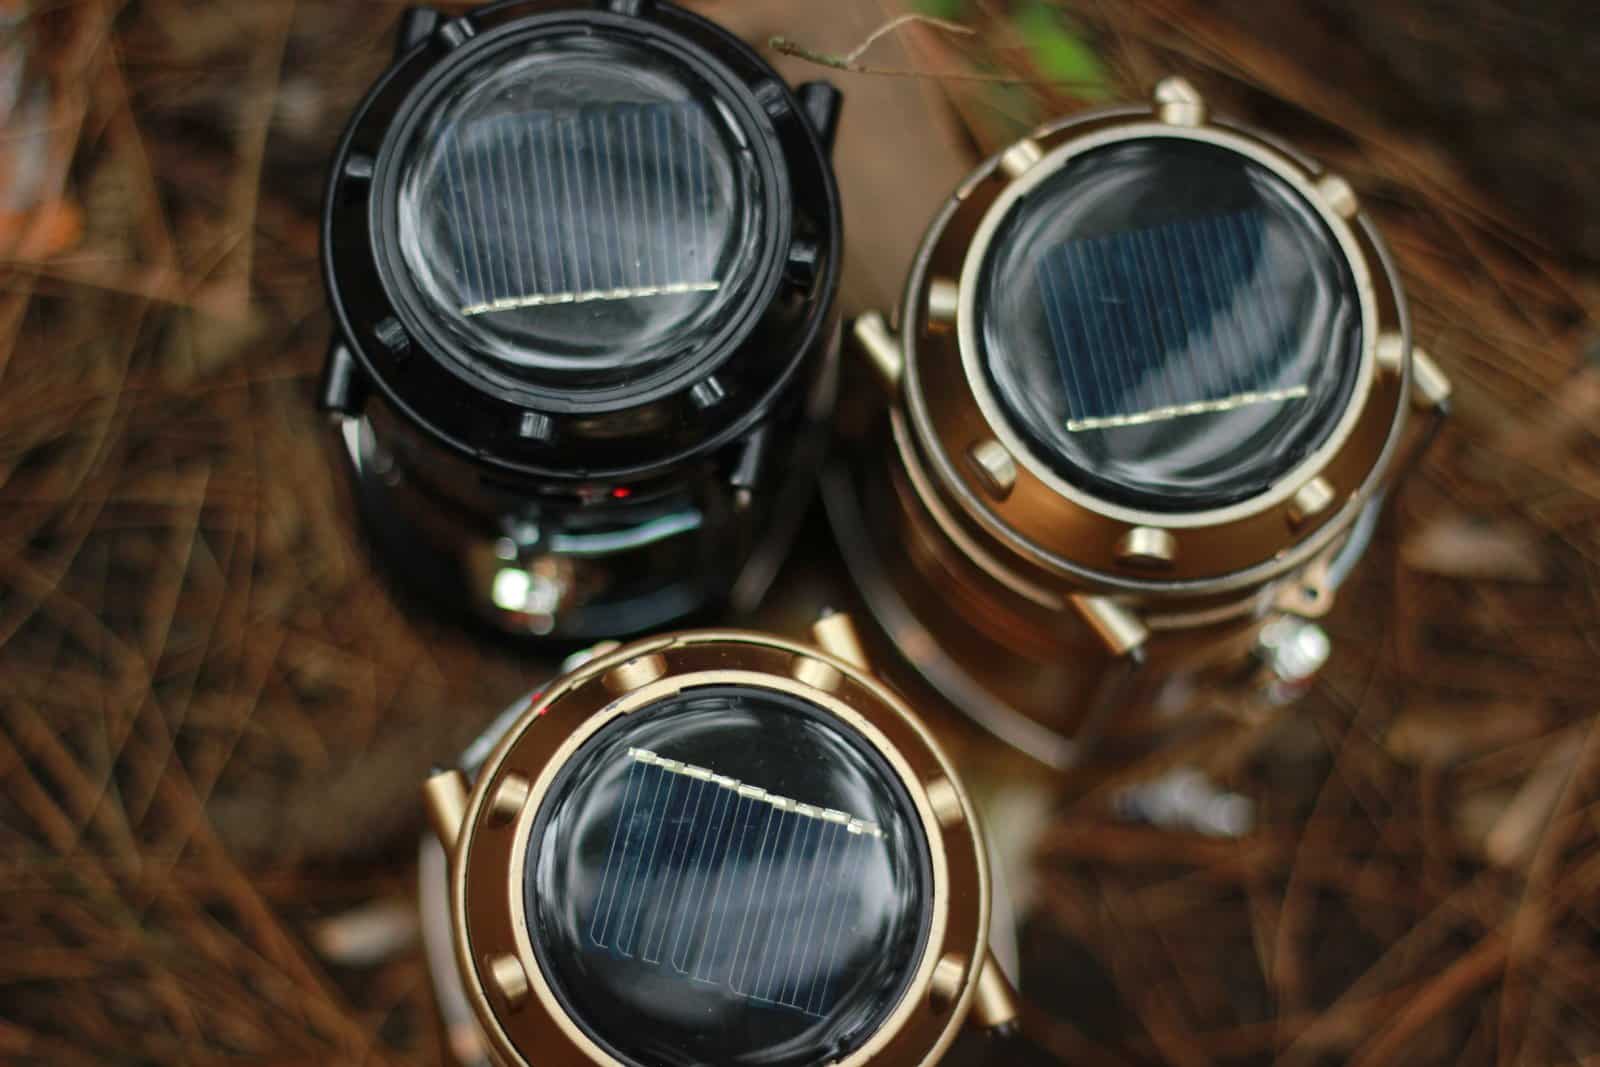 <p><span>Portable solar lanterns are perfect for eco-friendly travelers who love to camp or venture off the beaten path. These lanterns charge during the day and provide hours of light at night, eliminating the need for disposable batteries or electricity. Compact and collapsible designs make them easy to pack and carry, and they’re often waterproof and durable for outdoor use.</span></p> <p><b>Insider’s Tip: </b><span>Some solar lanterns also double as power banks, adding extra functionality for charging devices.</span></p>